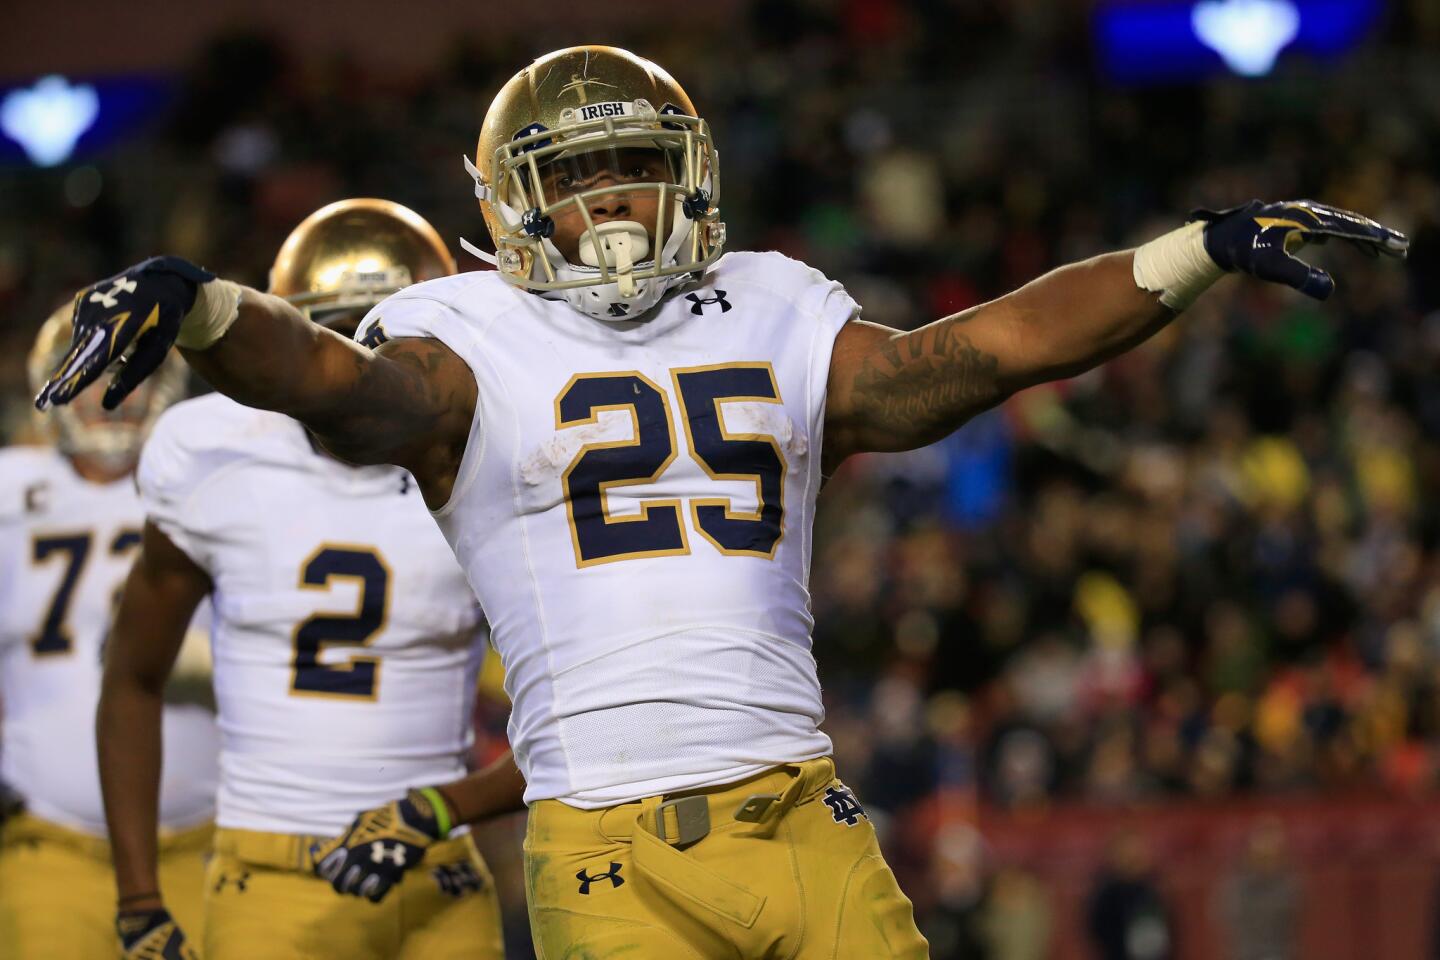 Notre Dame running back Tarean Folston celebrates after rushing for a fourth quarter touchdown.